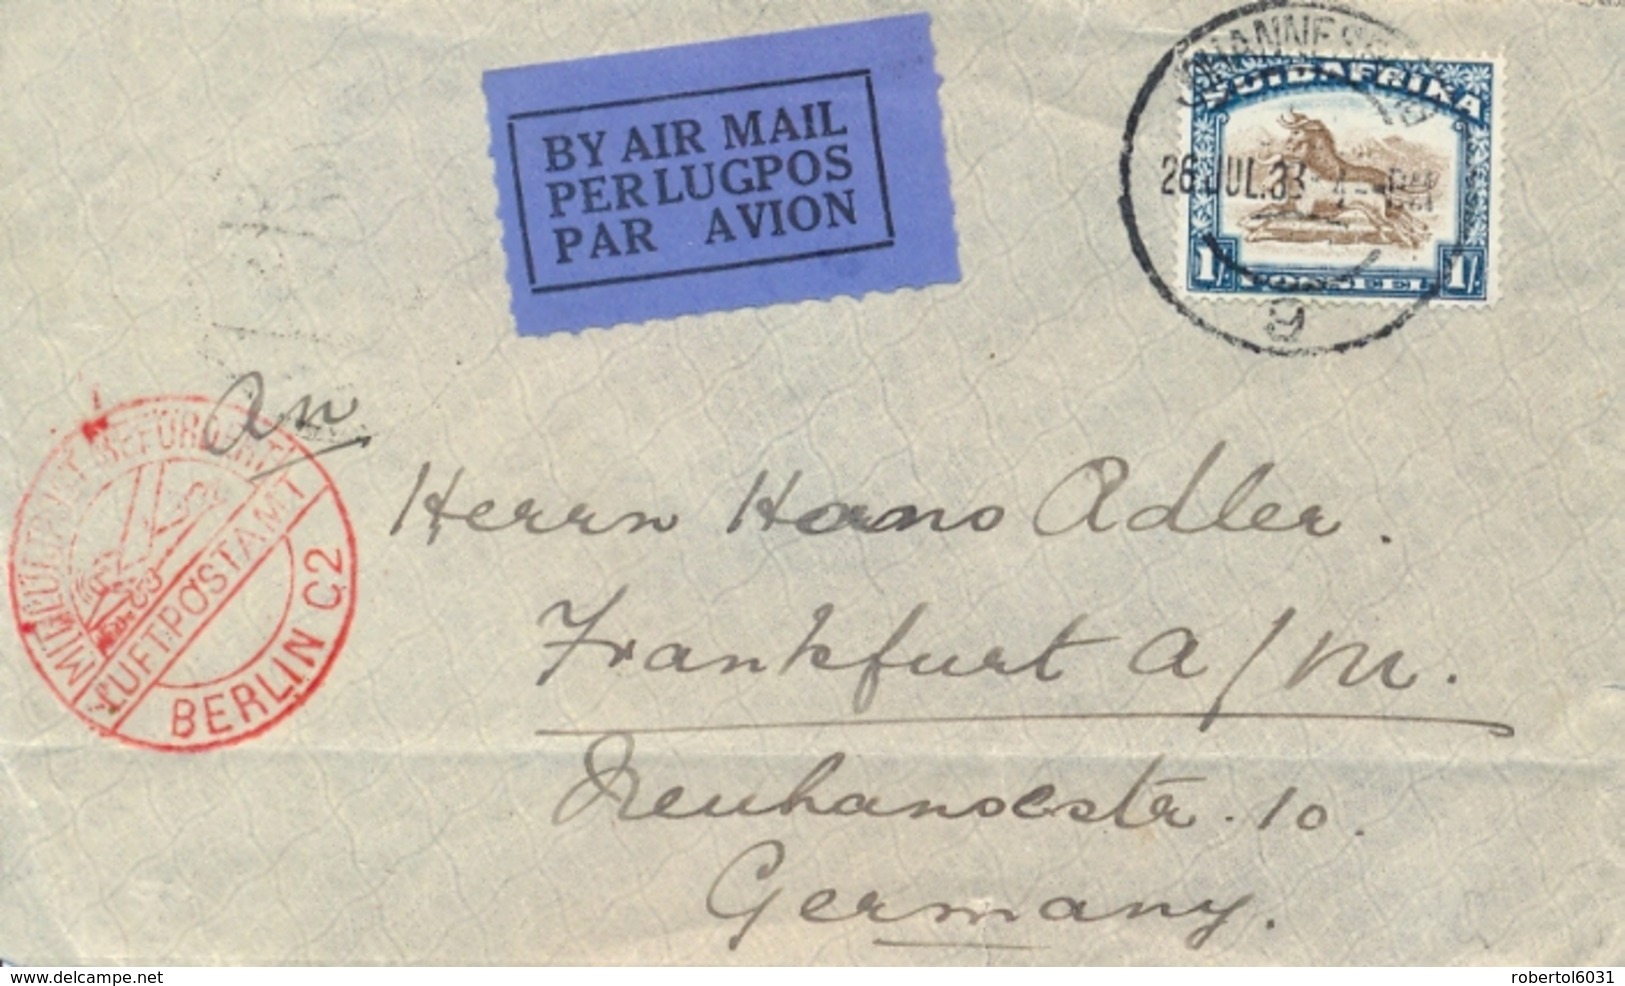 South Africa 1933 Cover By Airmail To Germany With Arrival Red Handstamp Luftpostamt Berlin C2 - Luftpost